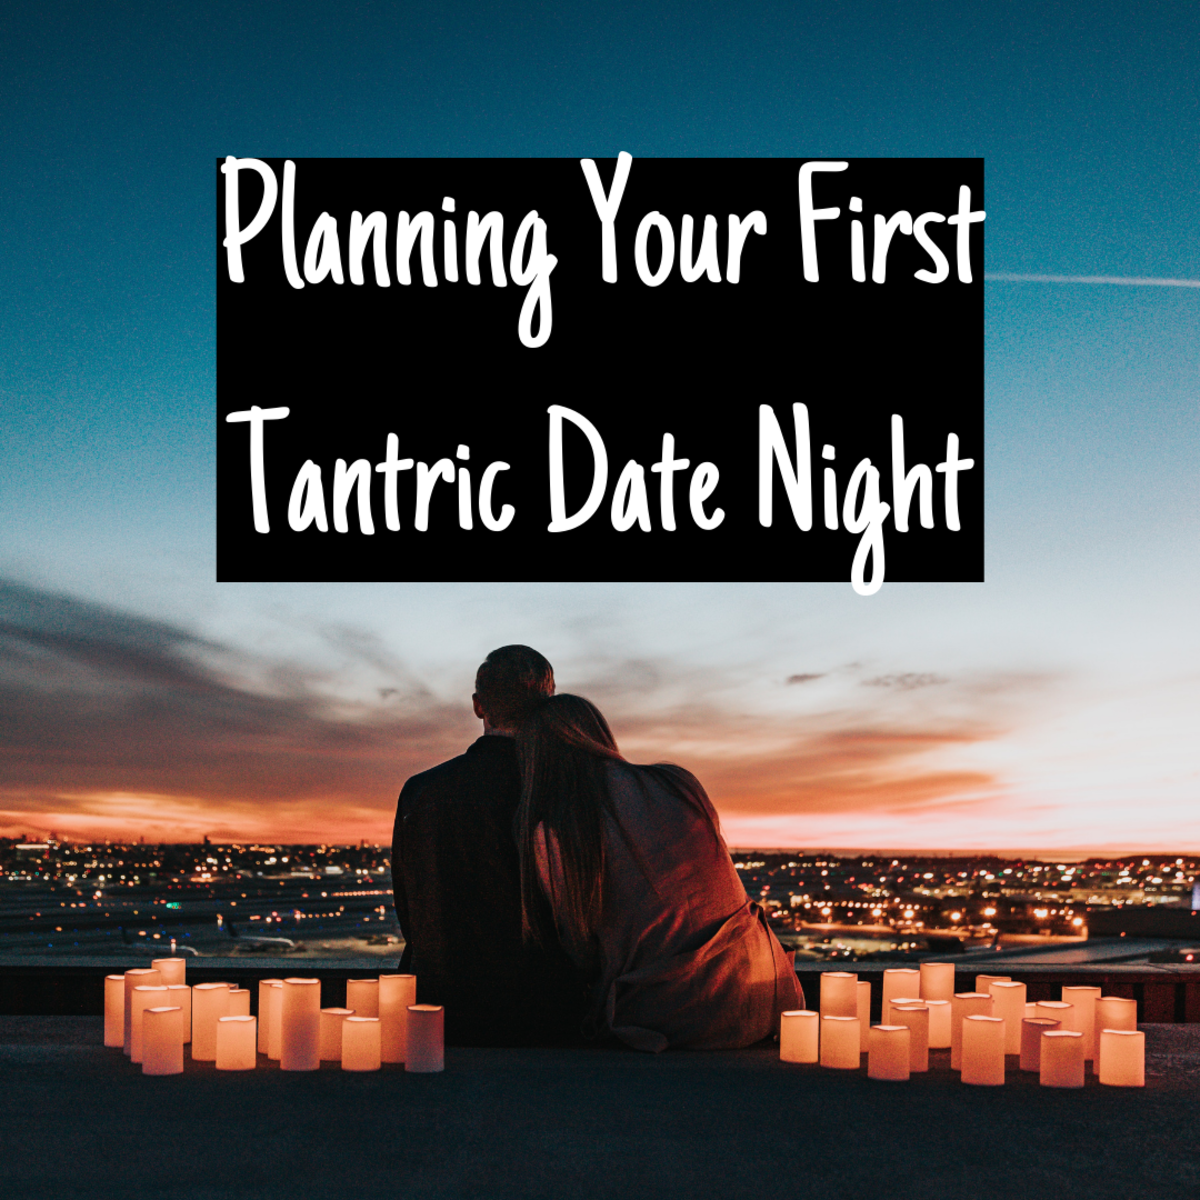 In this article, you'll learn how to plan for the perfect first tantric date night. This is something that every single person should experience and re-experience!